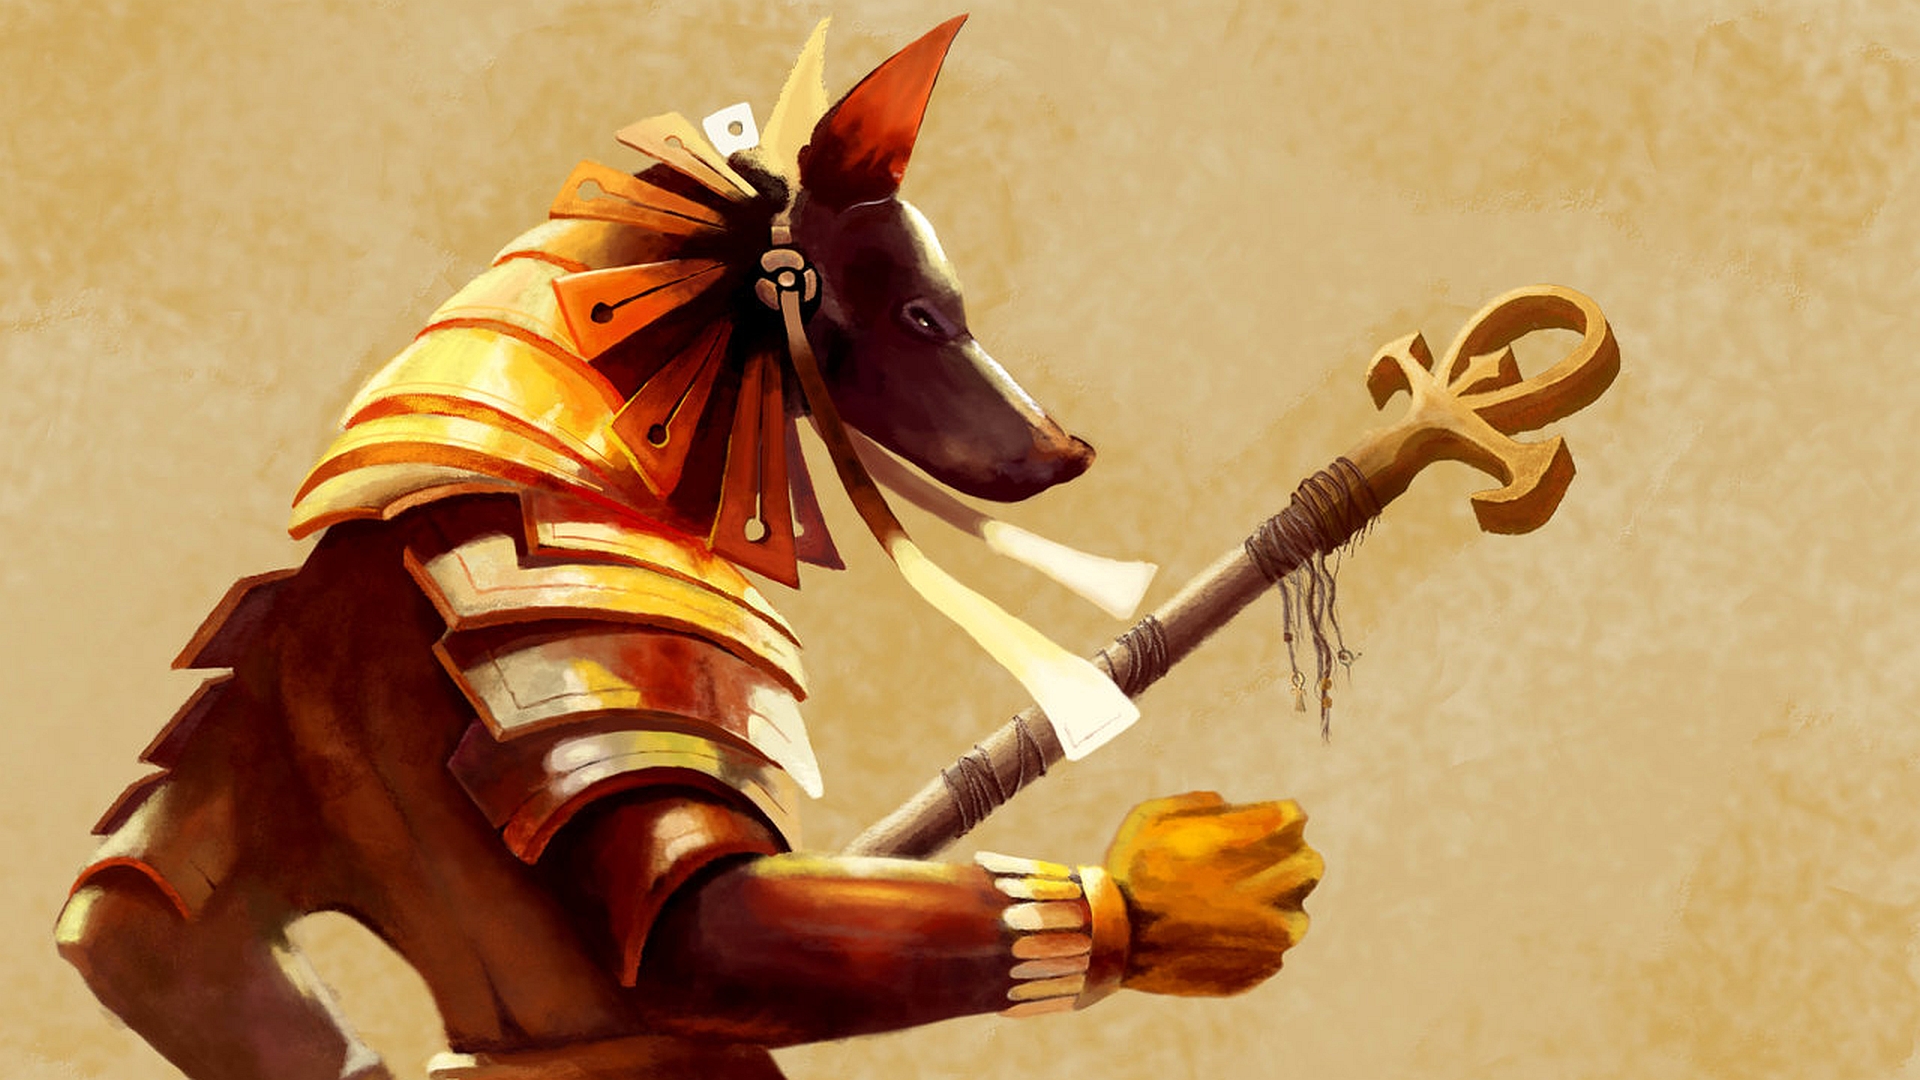 Anubis Wallpaper for PC Full HD Pictures